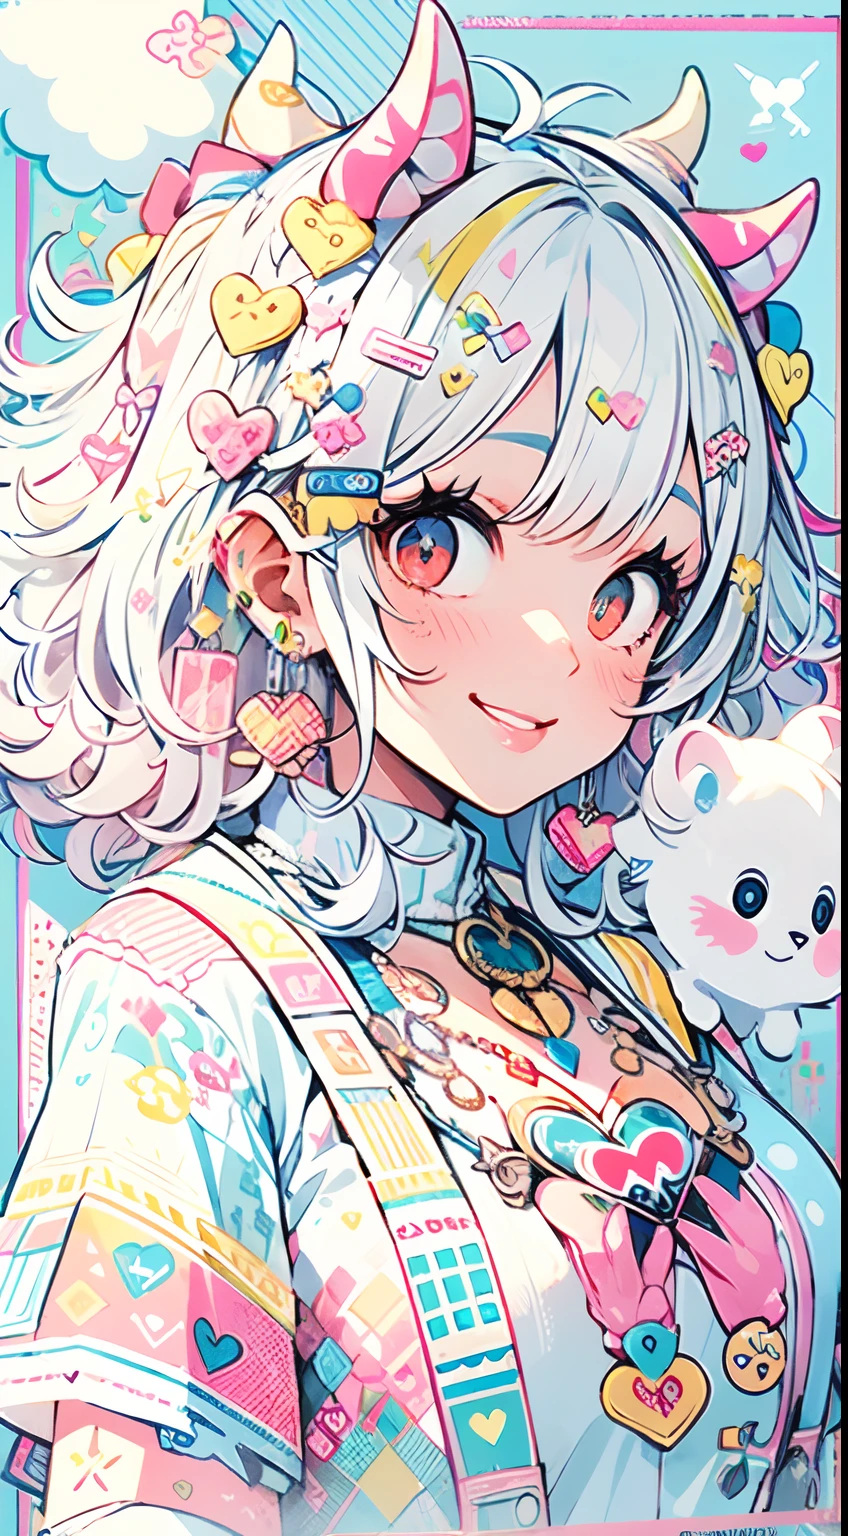 "kawaii, cute, adorable woman with pink, yellow, and baby blue color scheme. She is dressed in sky-themed clothes made out of clouds and sky motifs. Her outfit is fluffy and soft, with decora accessories like hairclips. She embodies the vibrant and trendy Harajuku fashion style." White hair, red eyes, horns, demon wings, big ,big ass, big lips, juicy lips, huge hair, smile